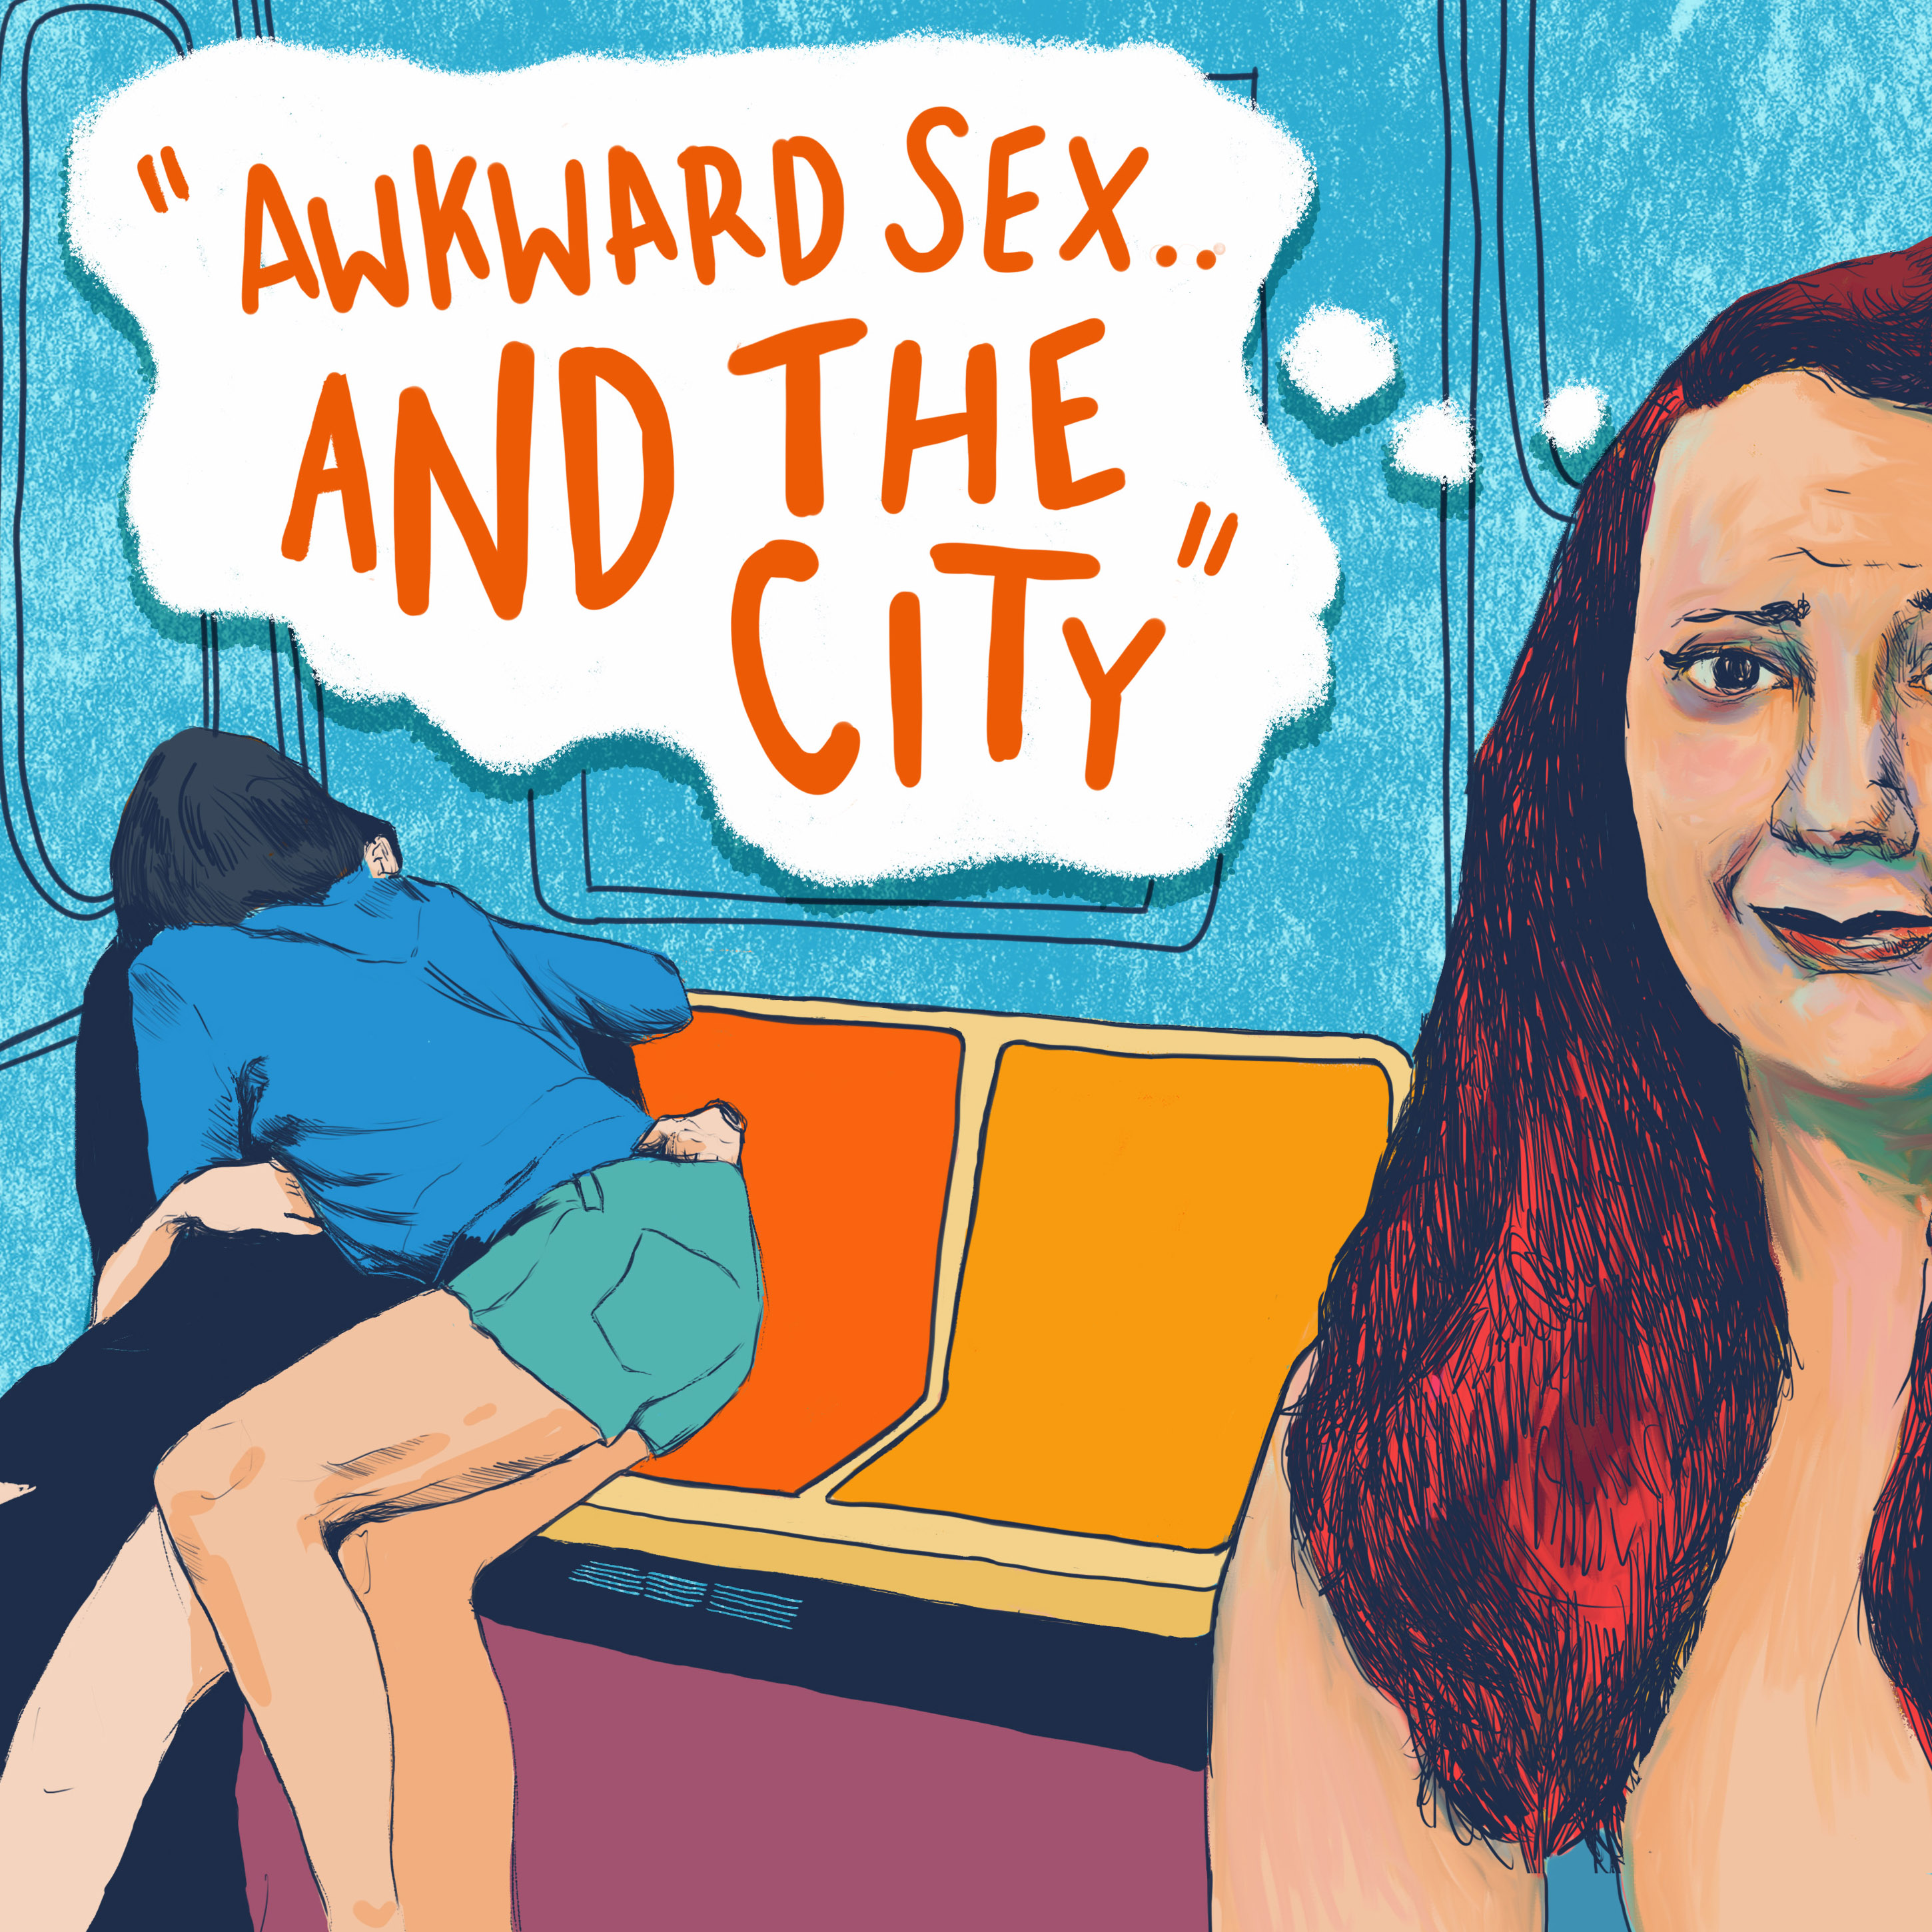 Awkward Sex And The City with Natalie Wall pic pic